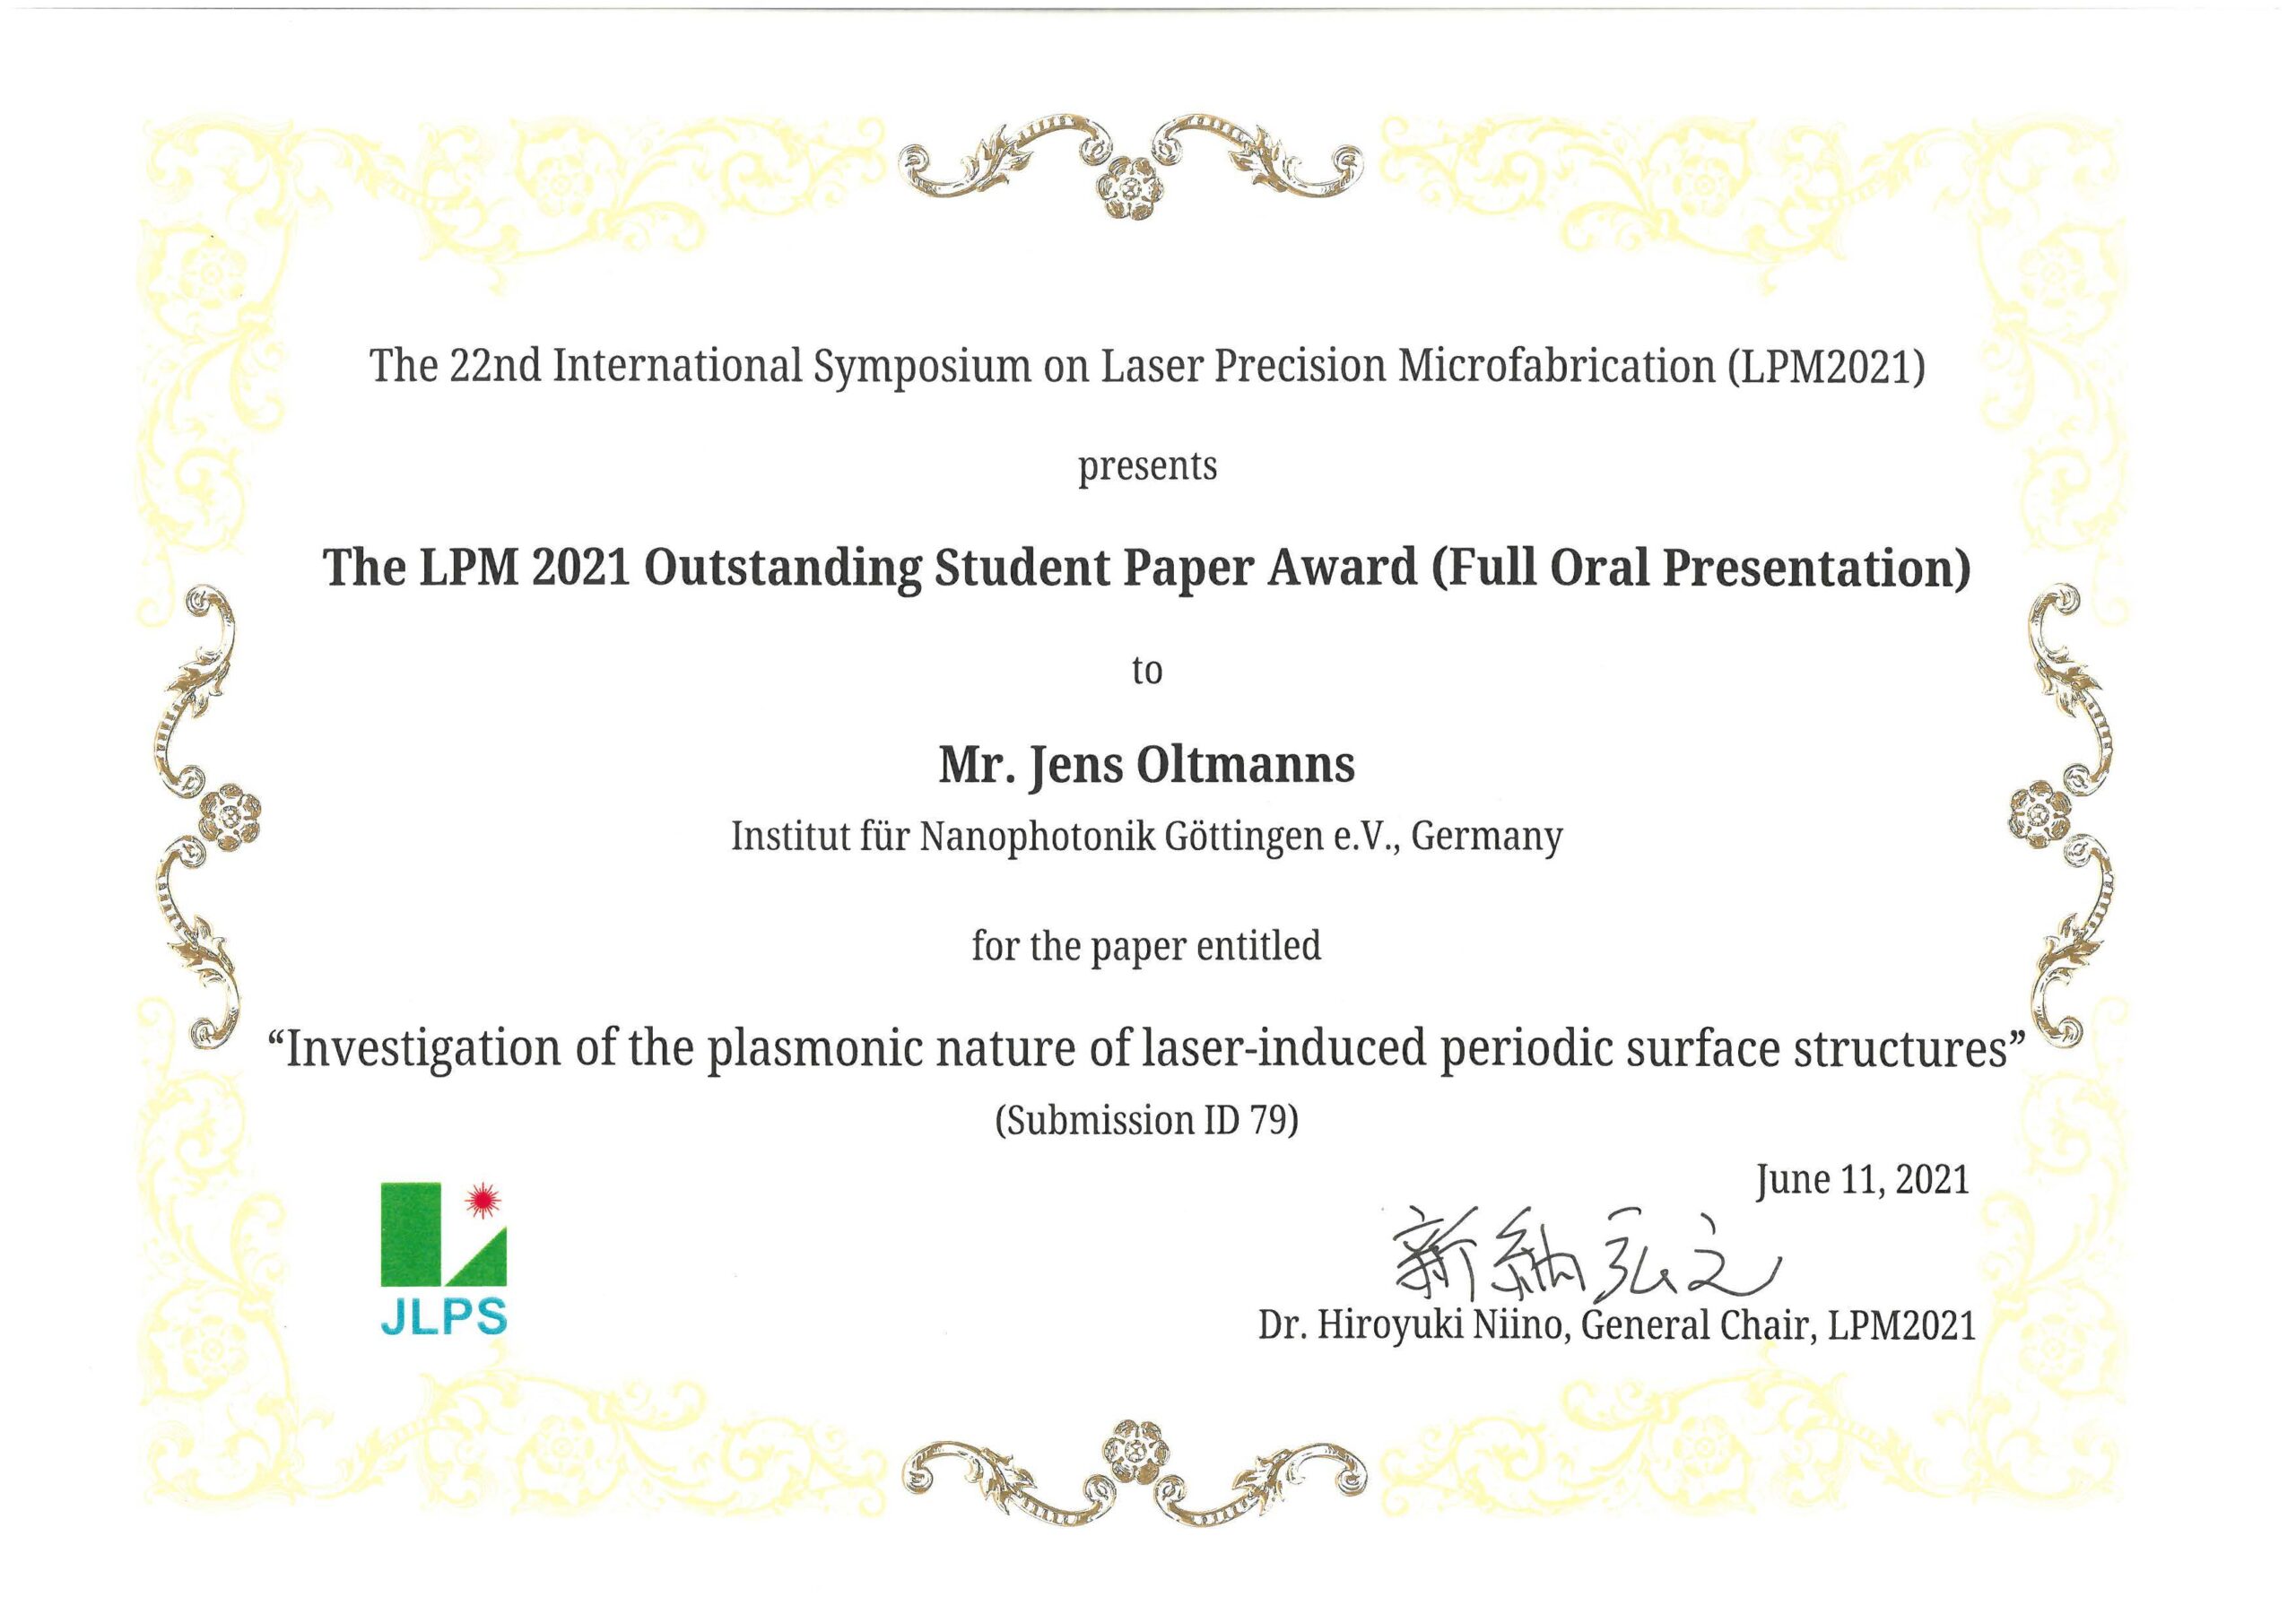 Jens Oltmanns awarded with the Outstanding Student Paper Award at the 22nd International Symposium on Laser Precision Microfabrication.